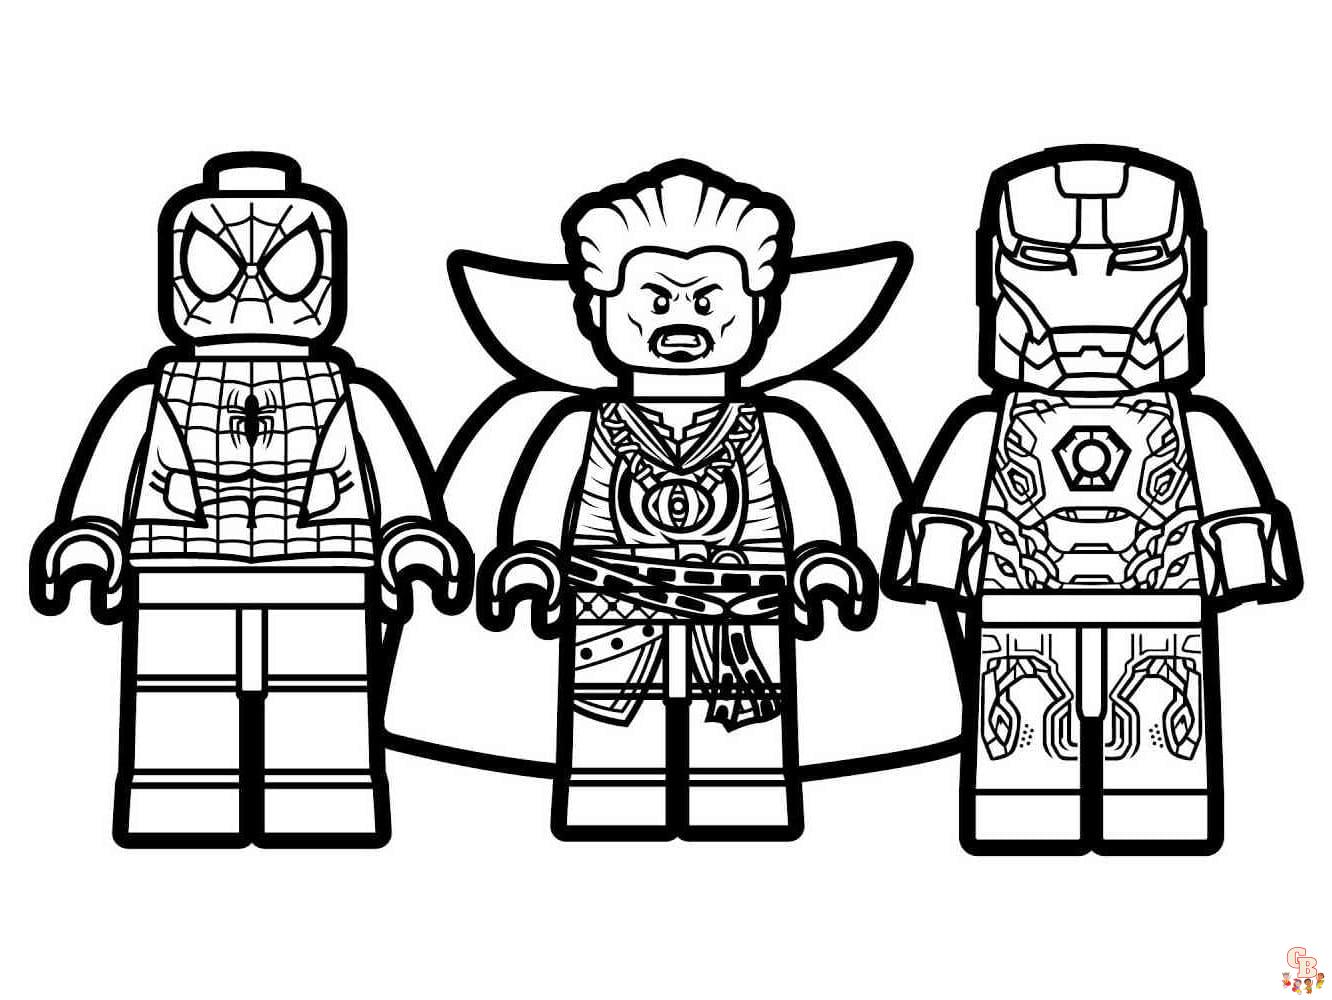 Lego Super Heroes Coloring Page